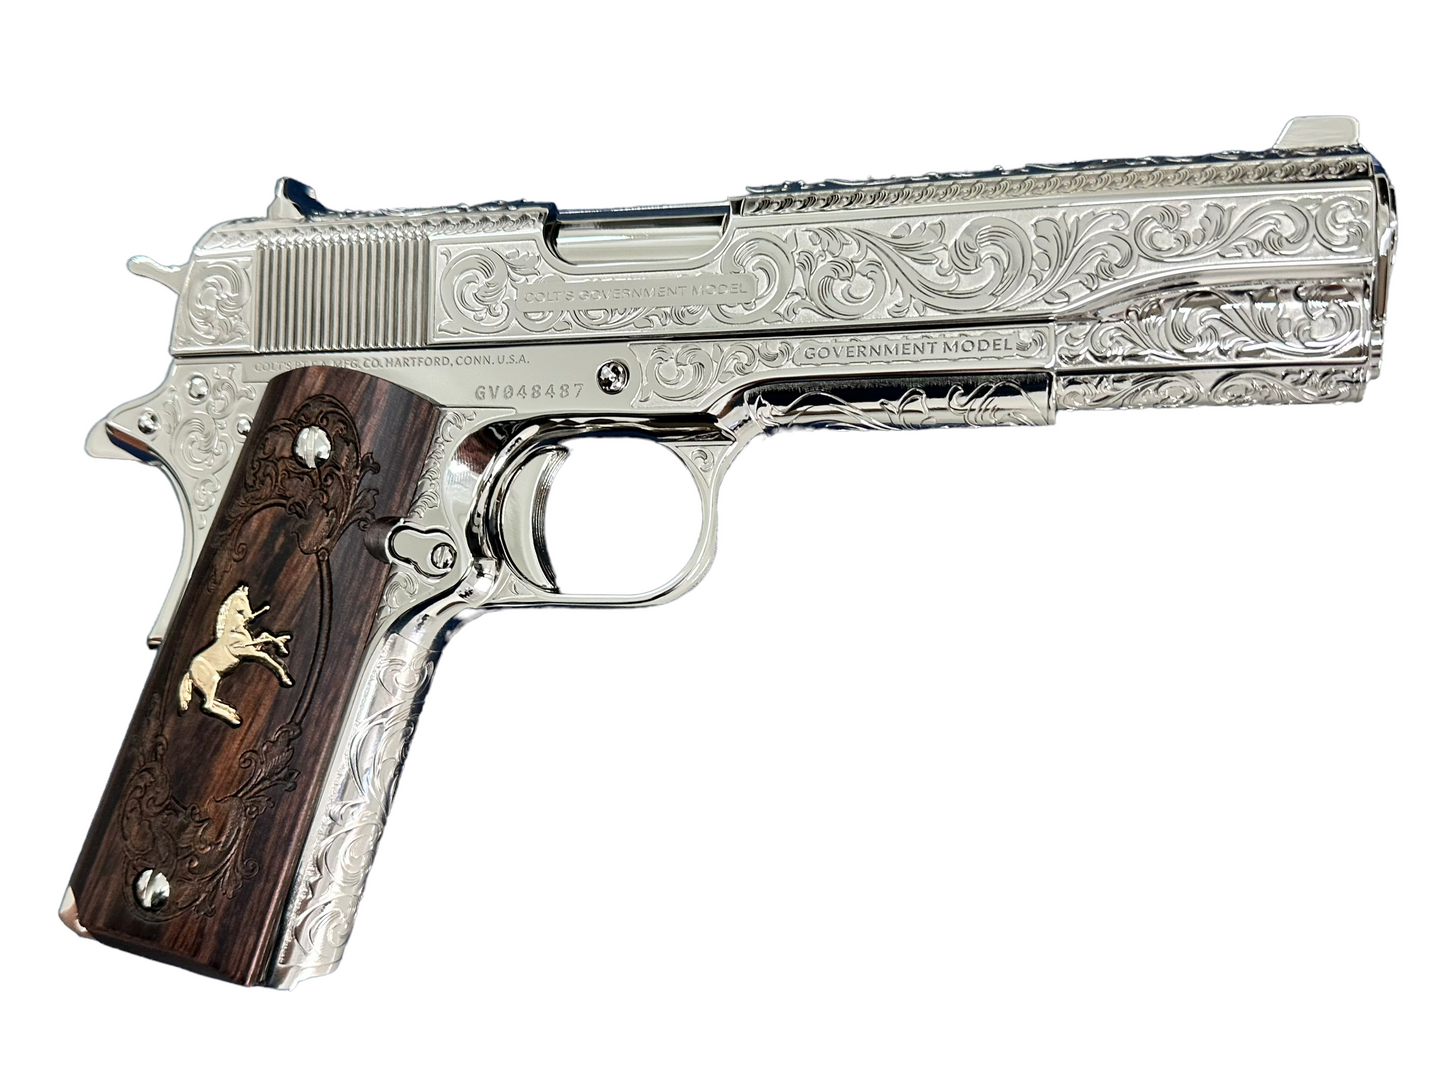 COLT CUSTOM 1911 HIGH POLISHED FULLY ENGRAVED NICKEL PLATED WITH CUSTOM GRIPS .45ACP